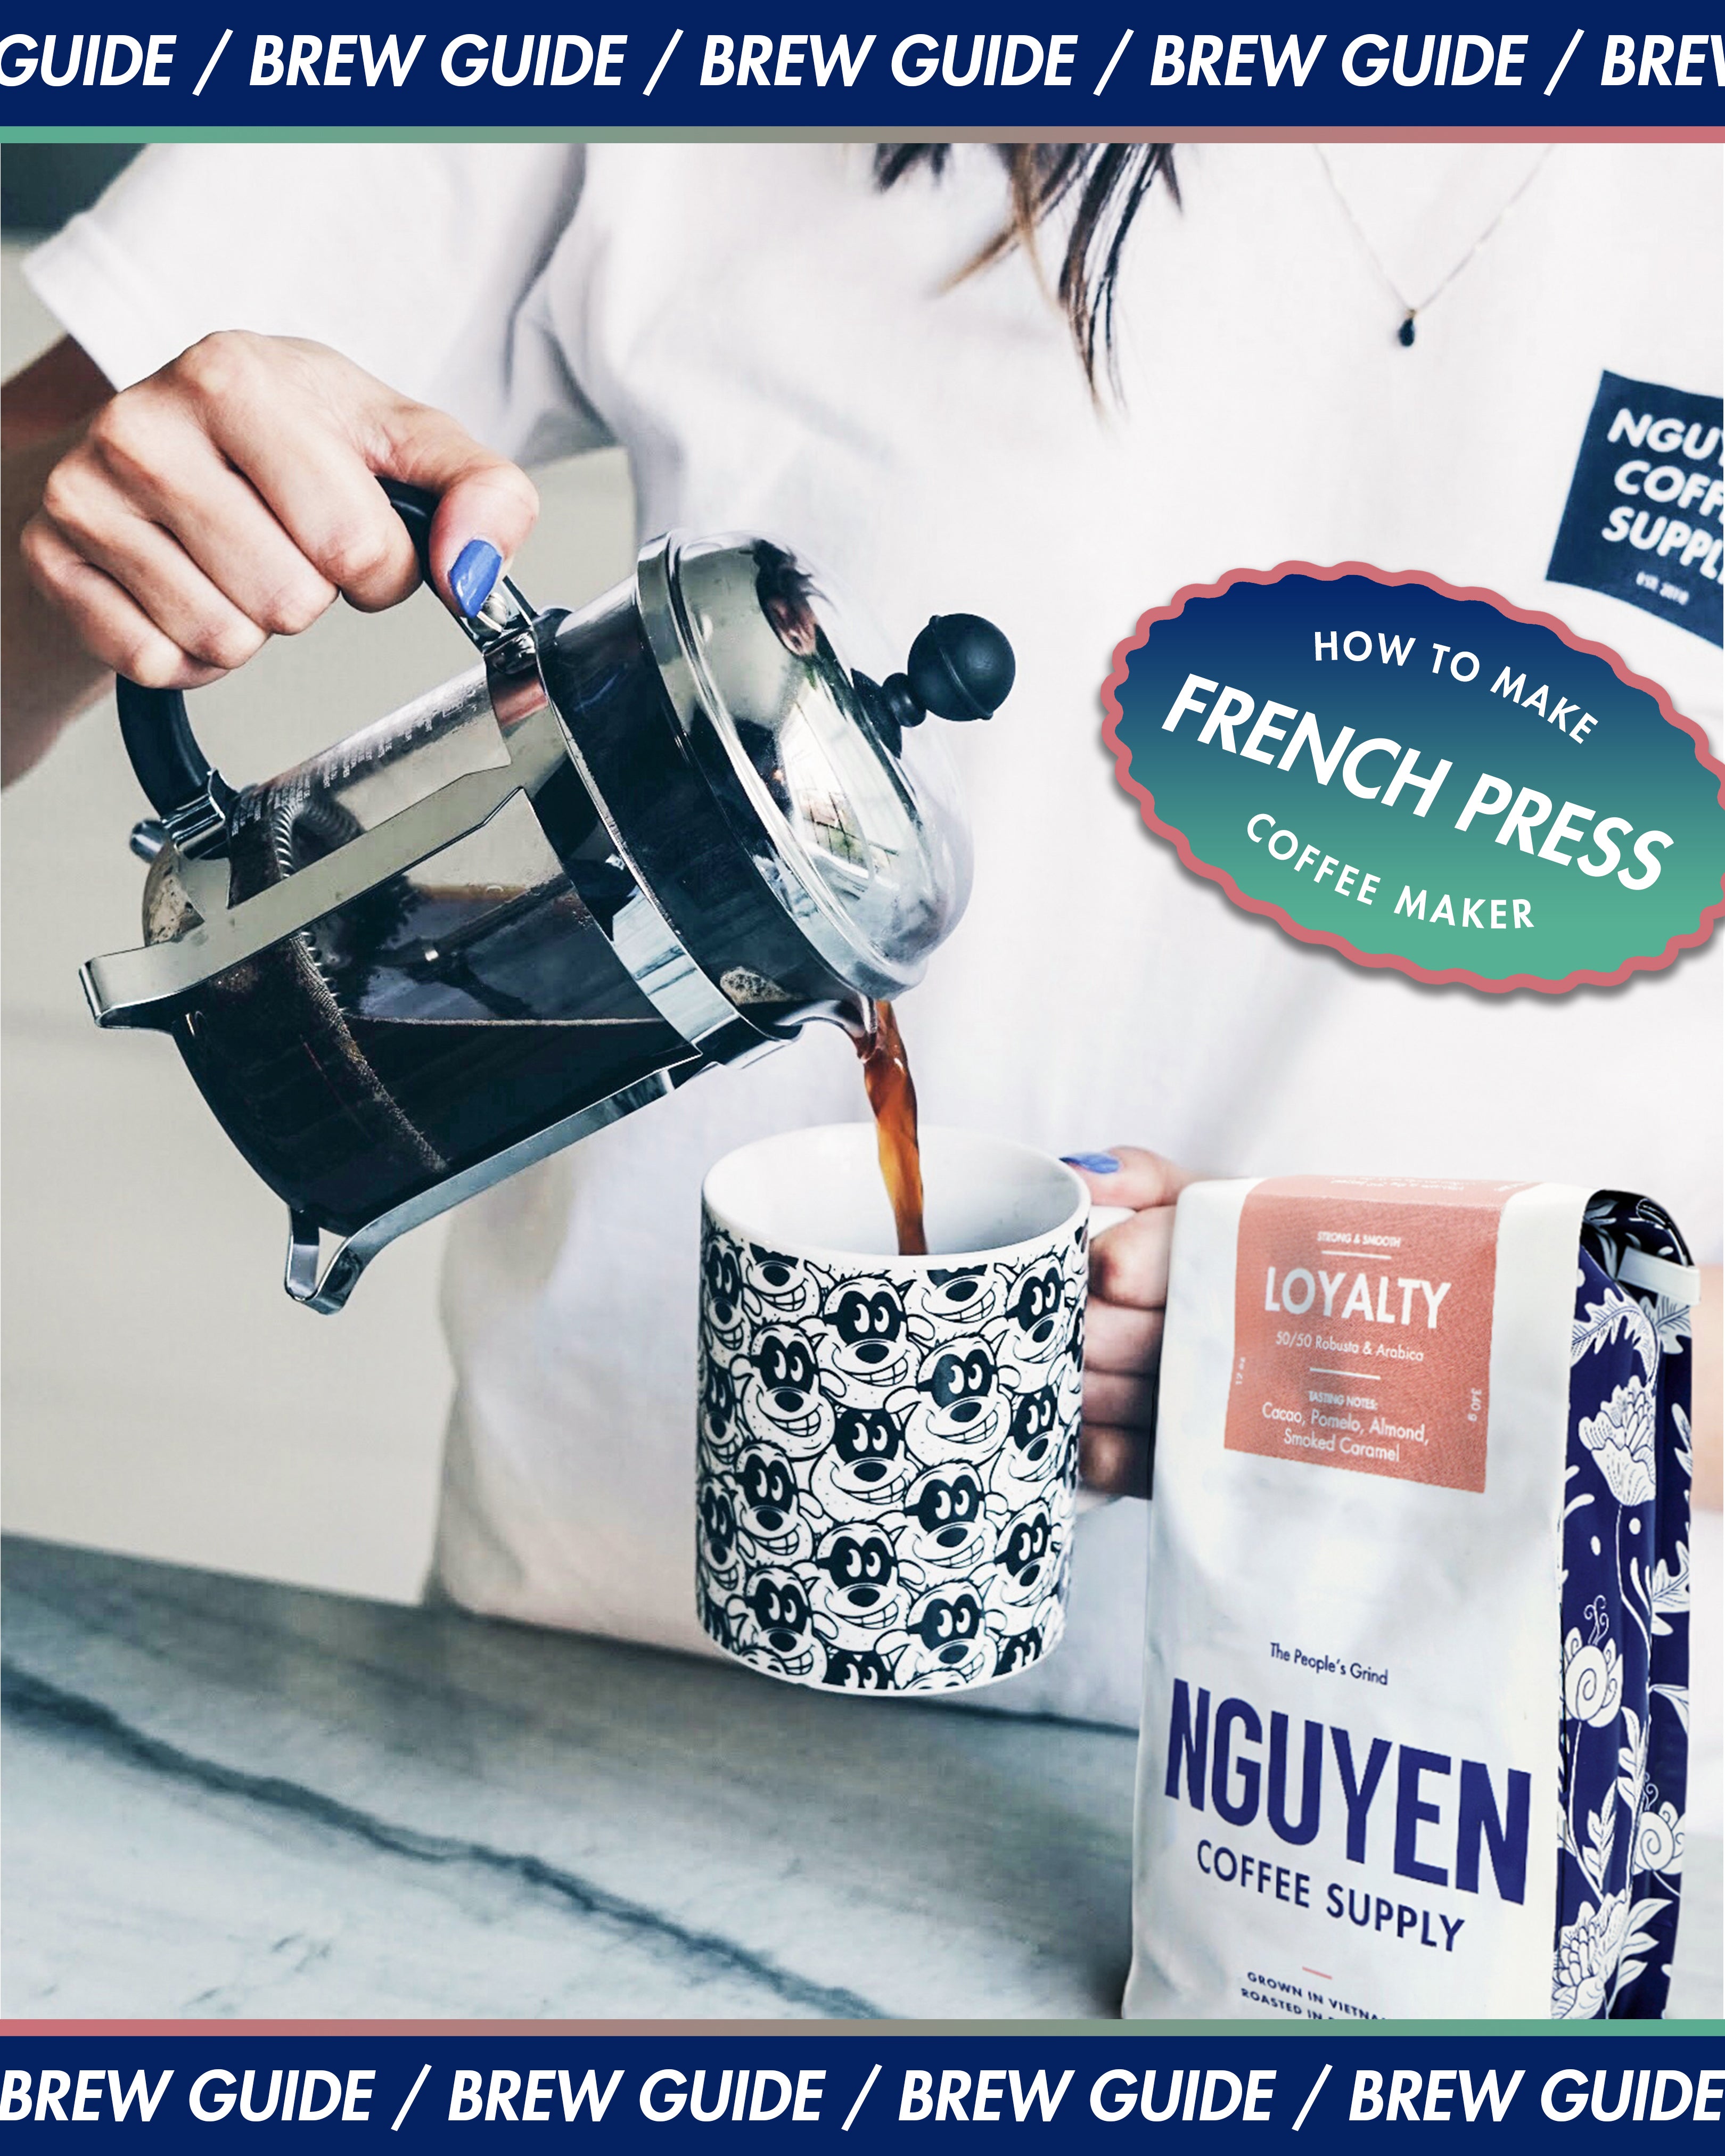 French Pressing with Vietnamese Coffee